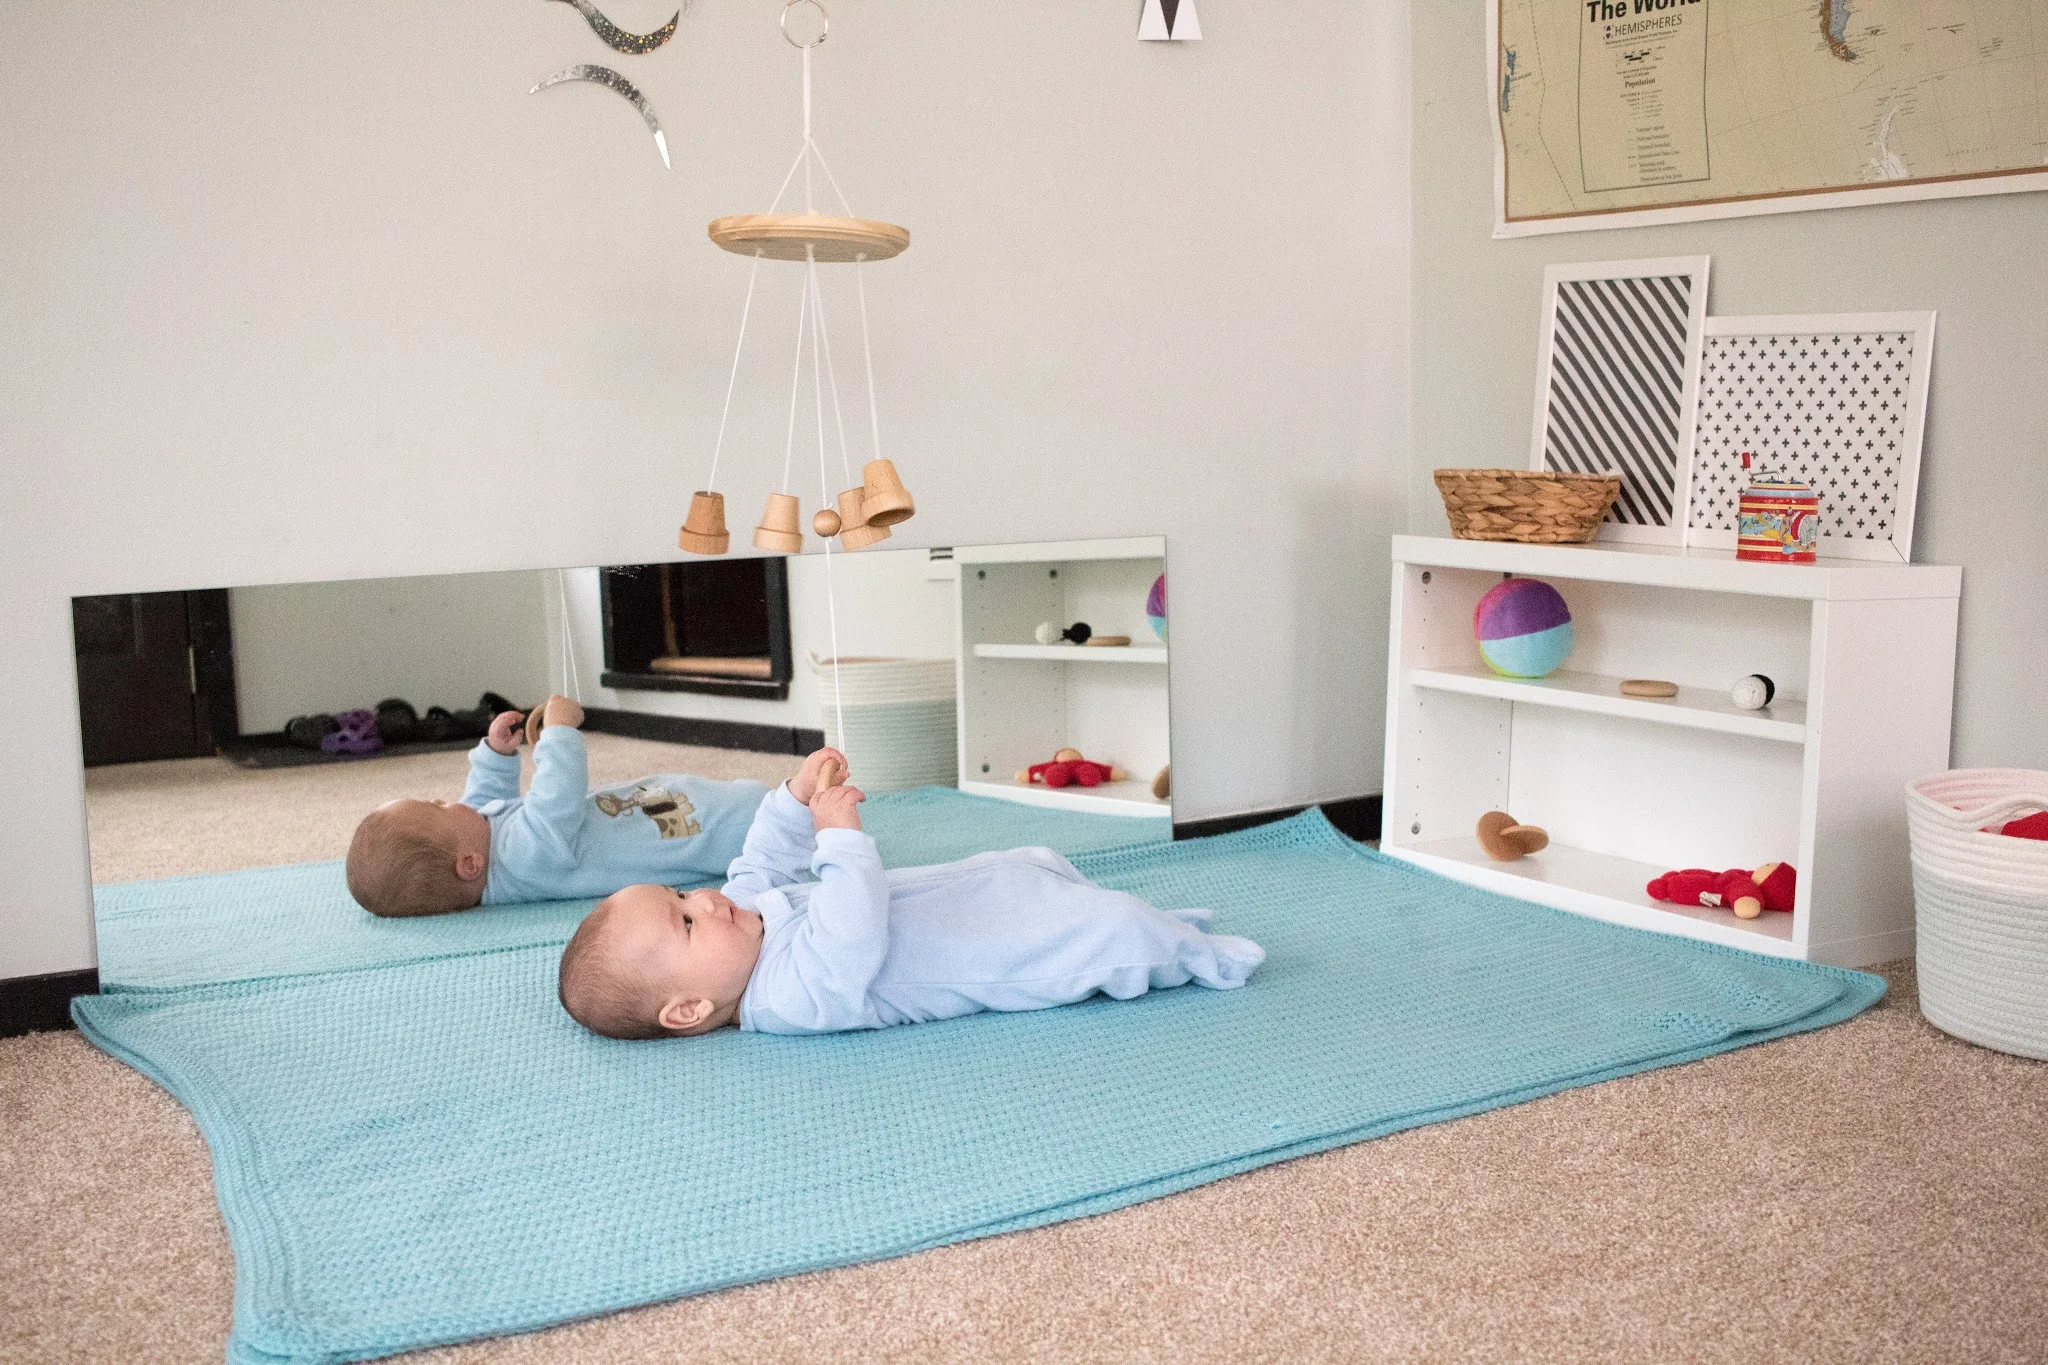 A movement area for a Montessori baby that can move! As a baby starts to roll, some changes need to be made to accommodate play and exploration.